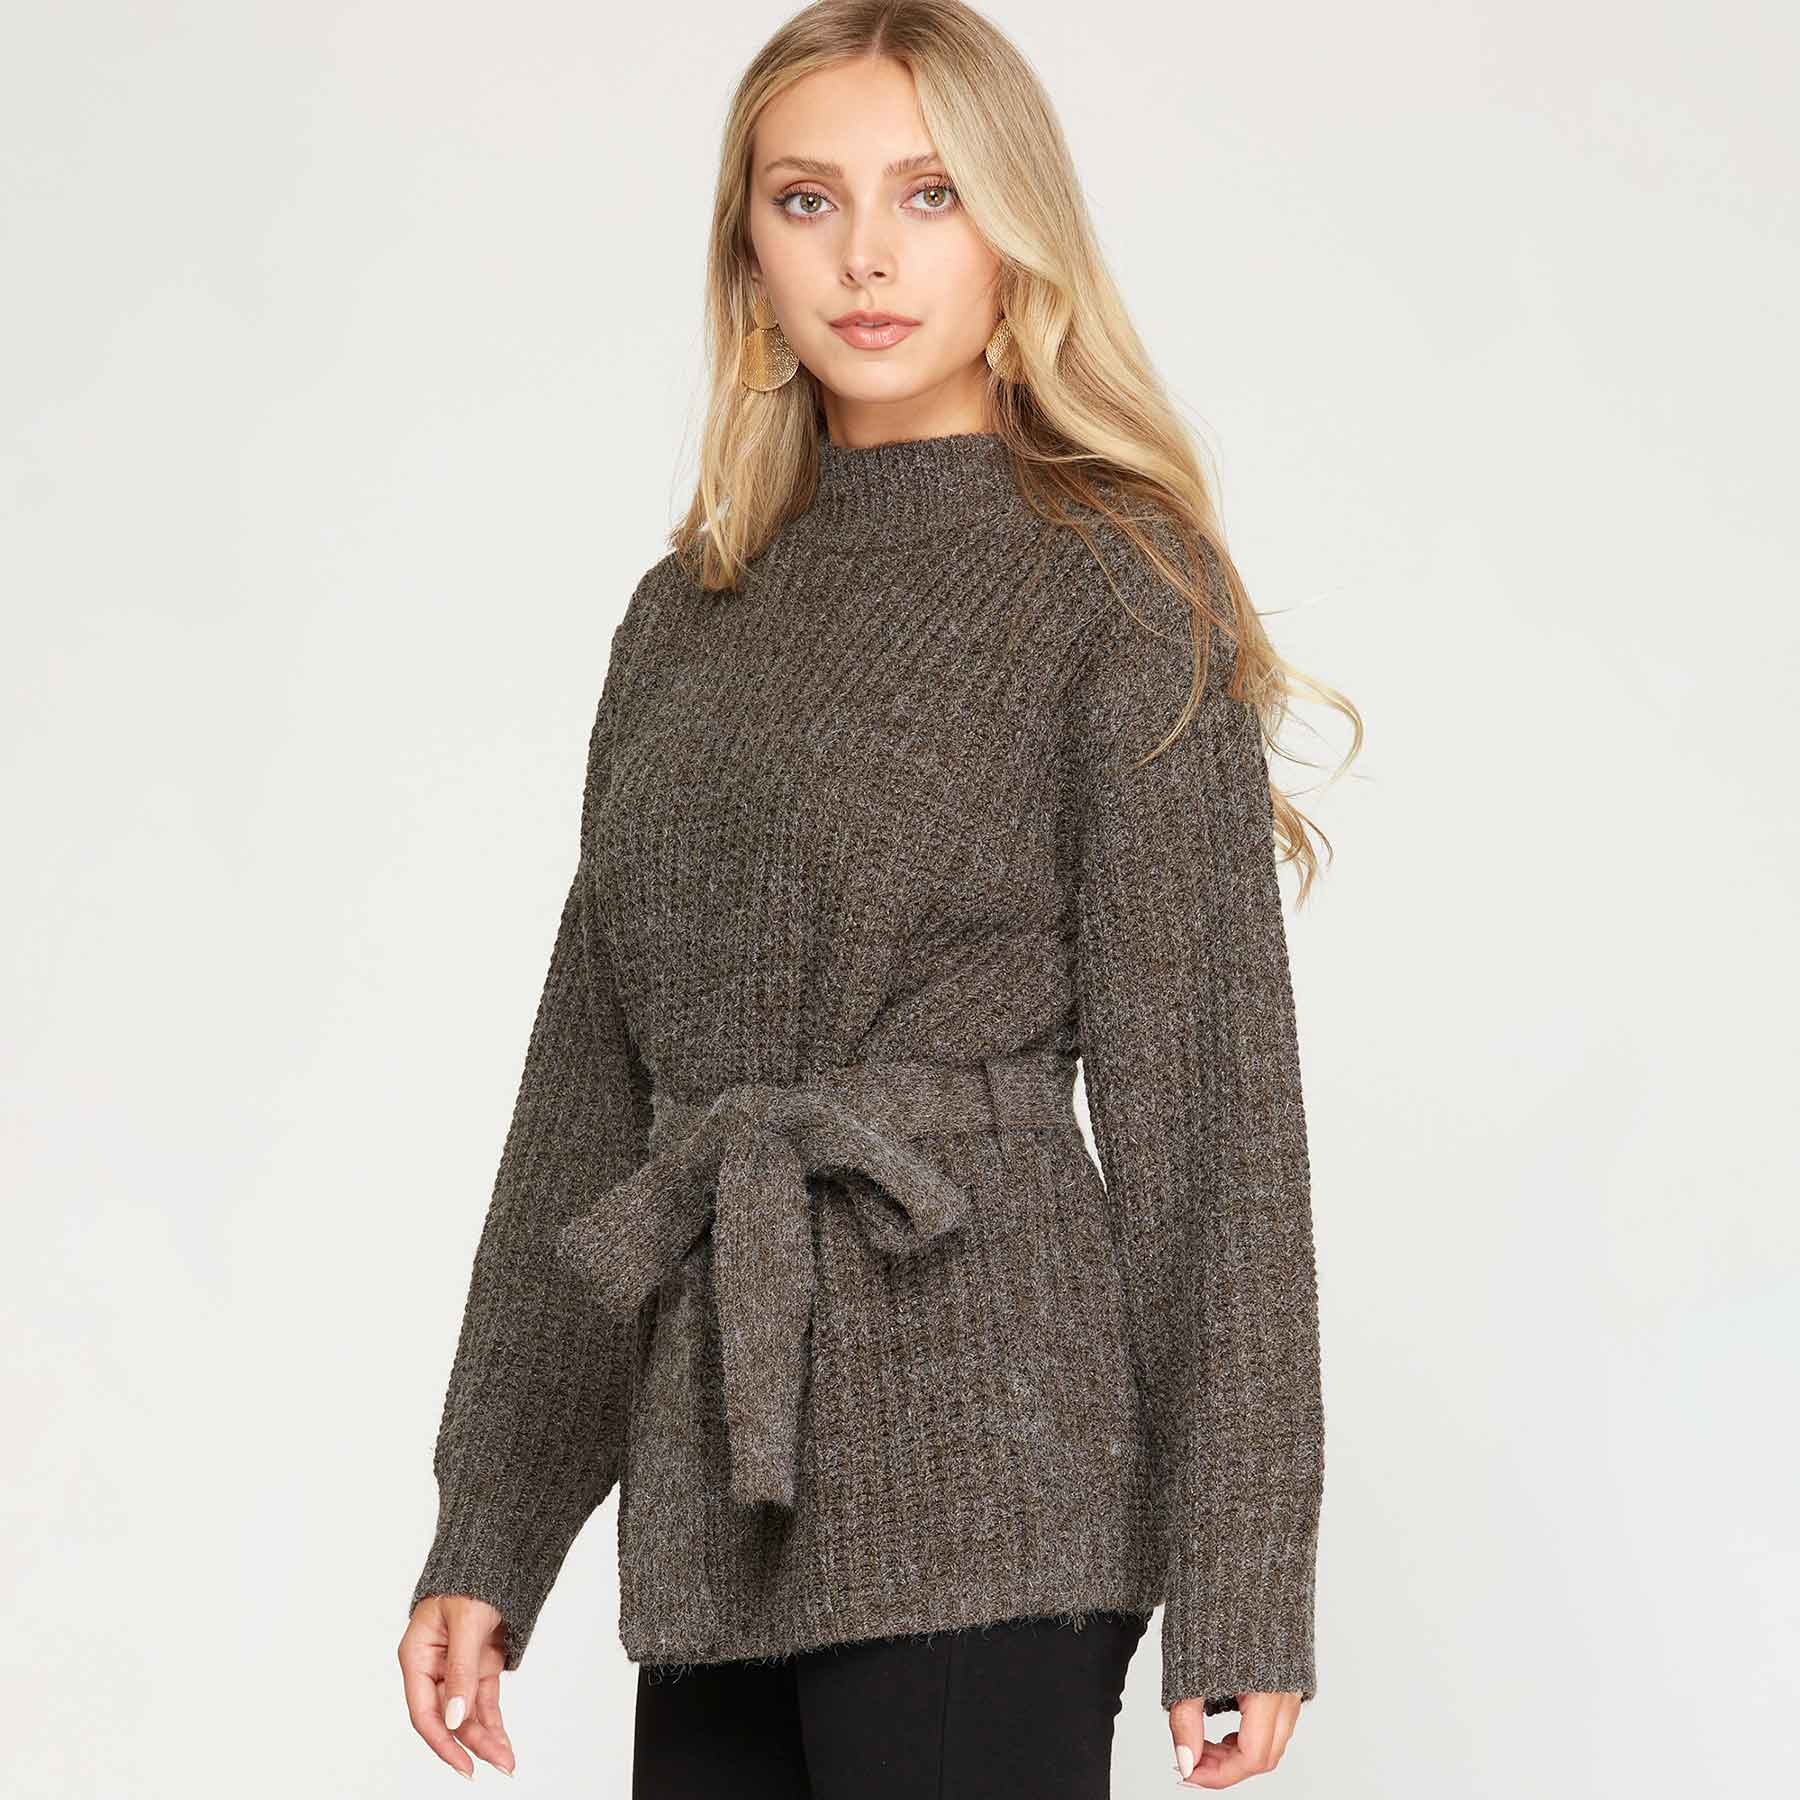 Long Sleeve Knit Sweater Top with Waist Tie Detail